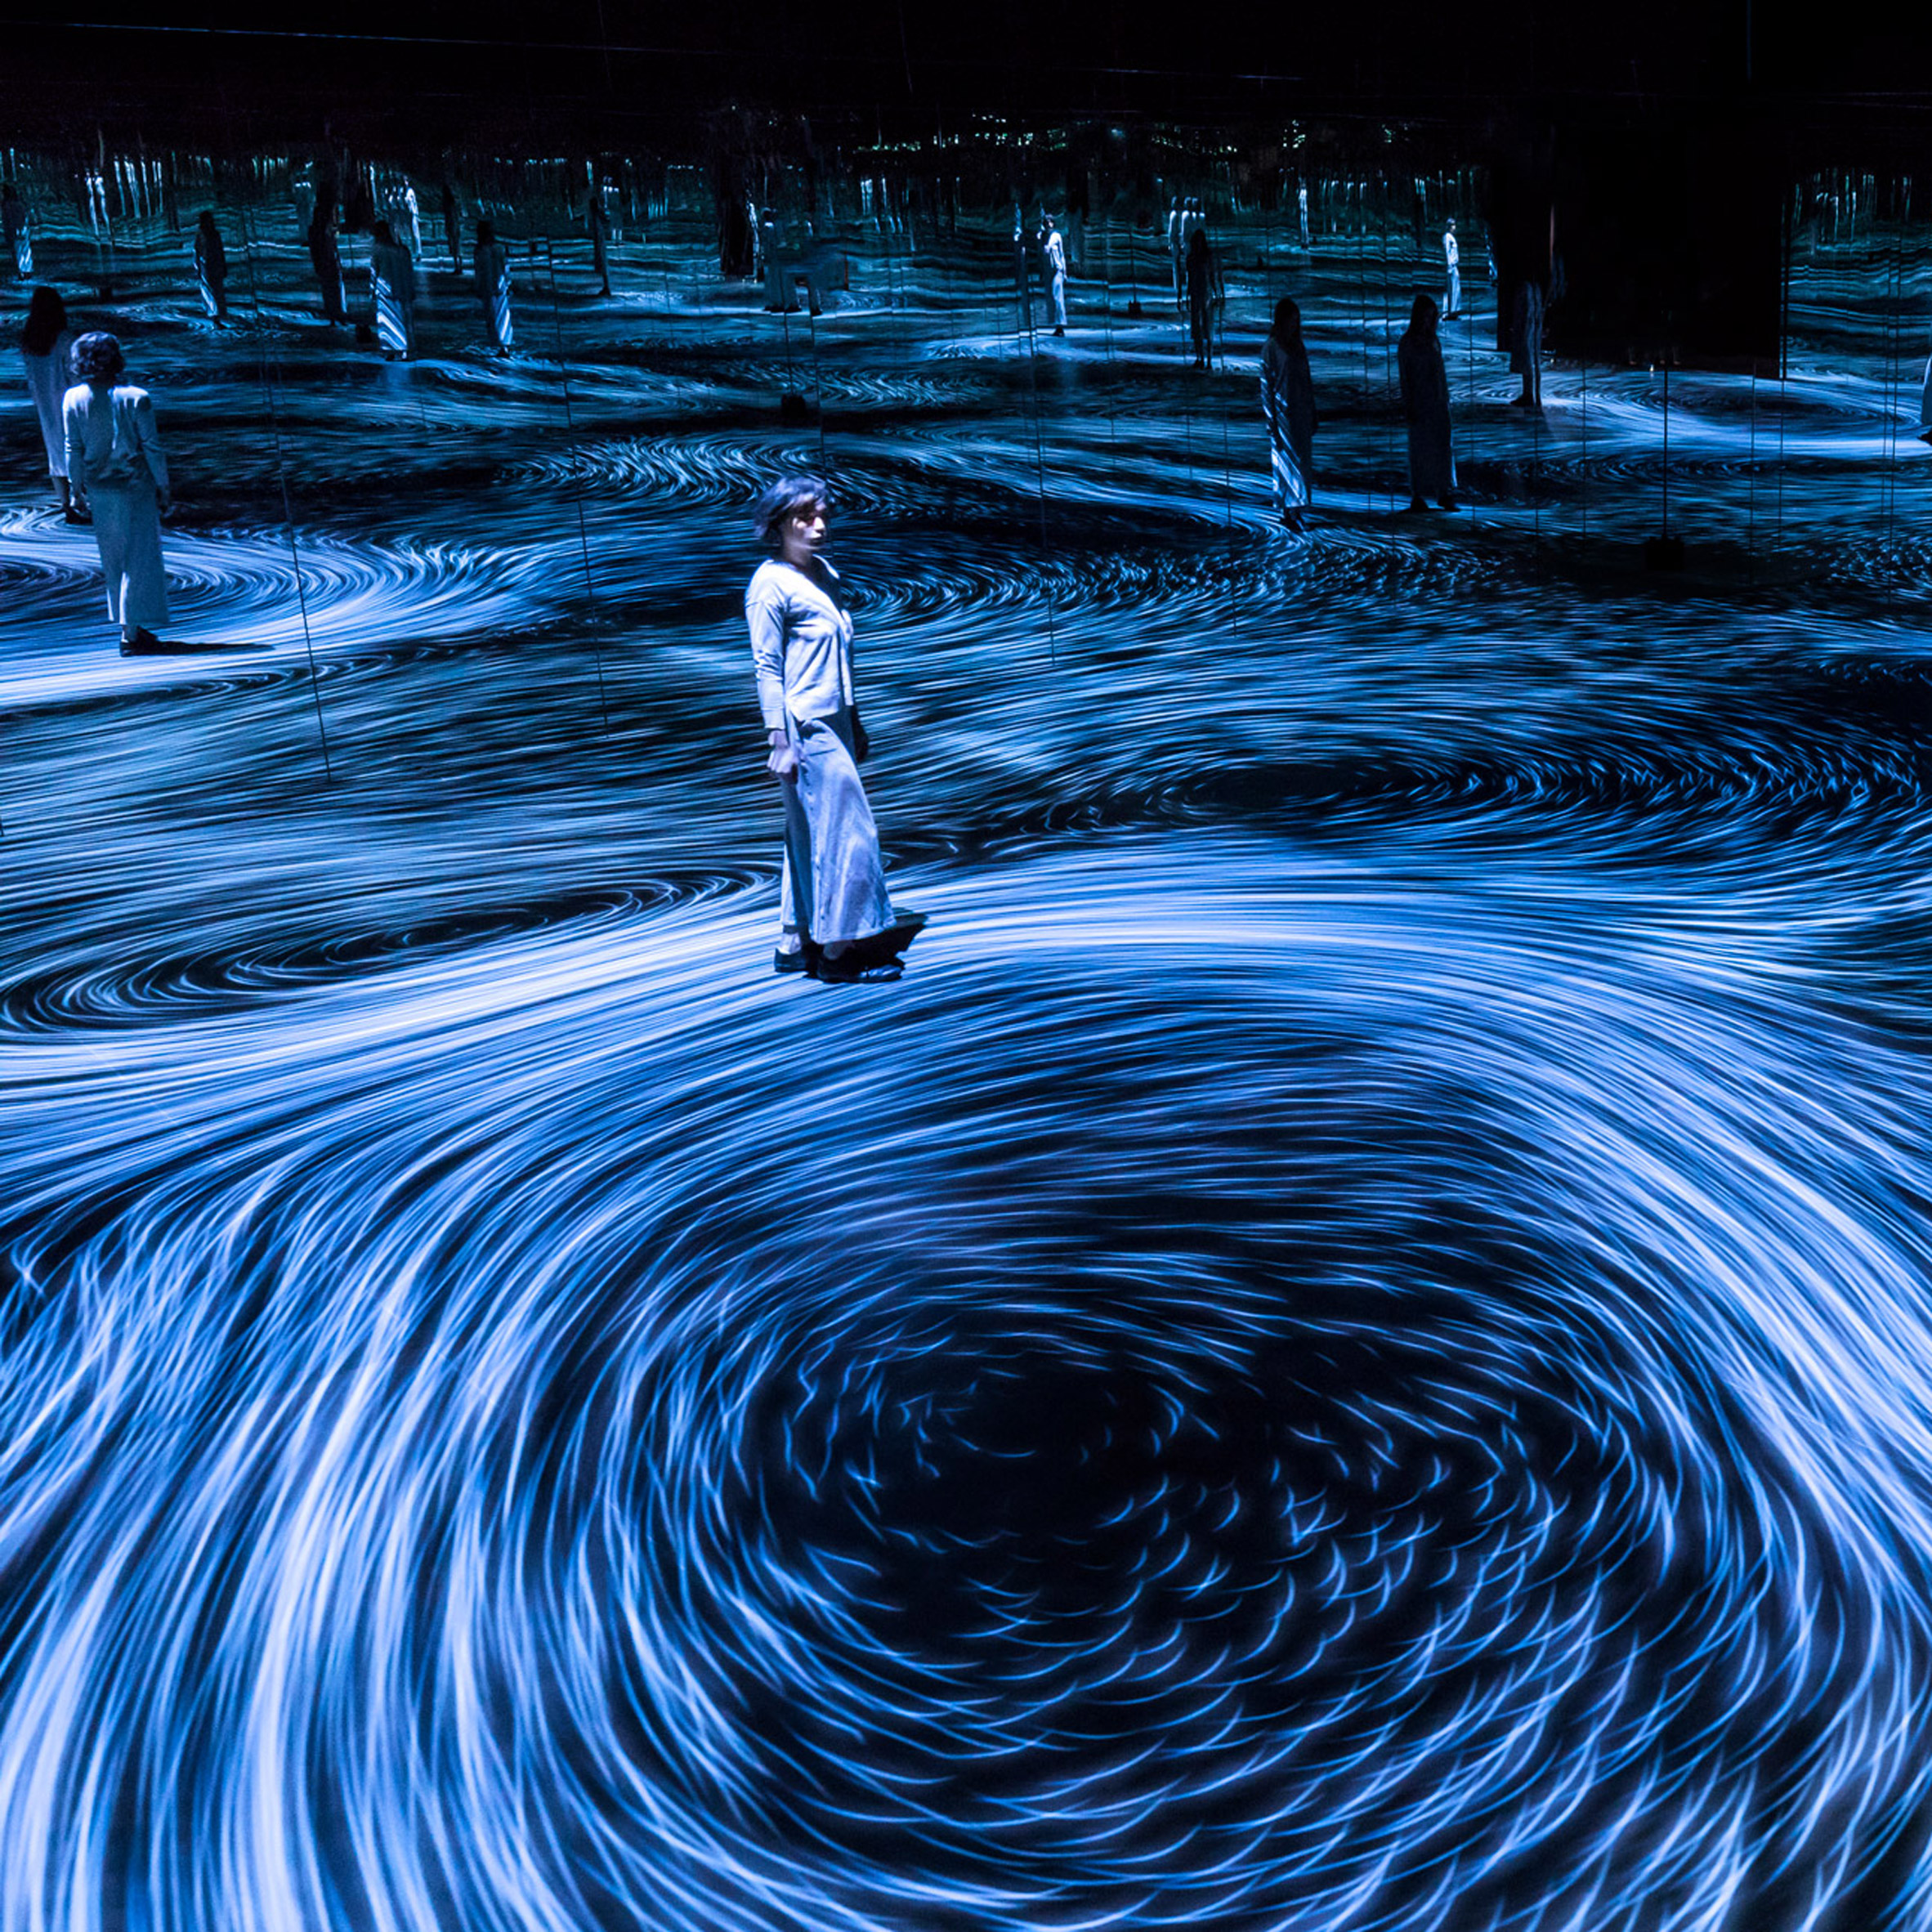 Dezeen's top 10 installations of 2018: Moving Creates Vorticles Create Movement, Australia, by TeamLab